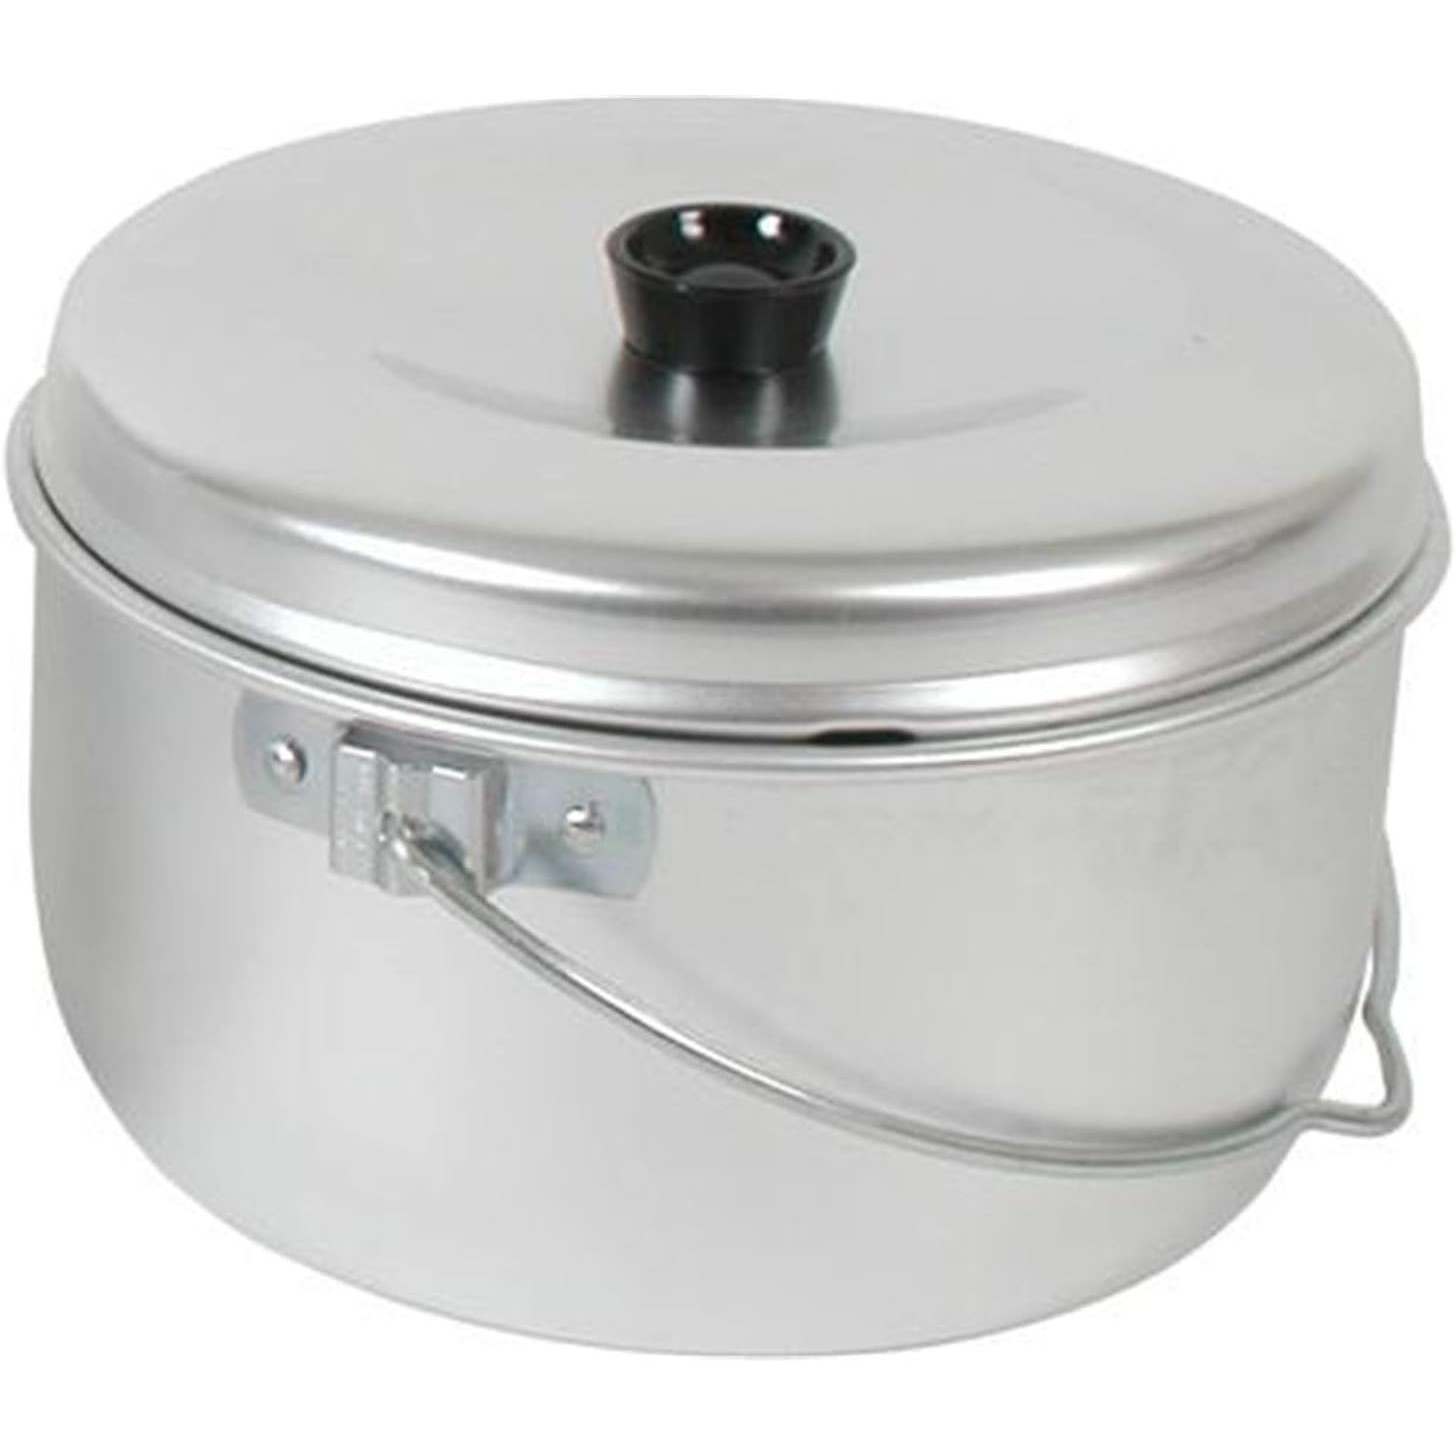 Trangia Billy & Lid 2.5L Camping Cookware with Bail Handle